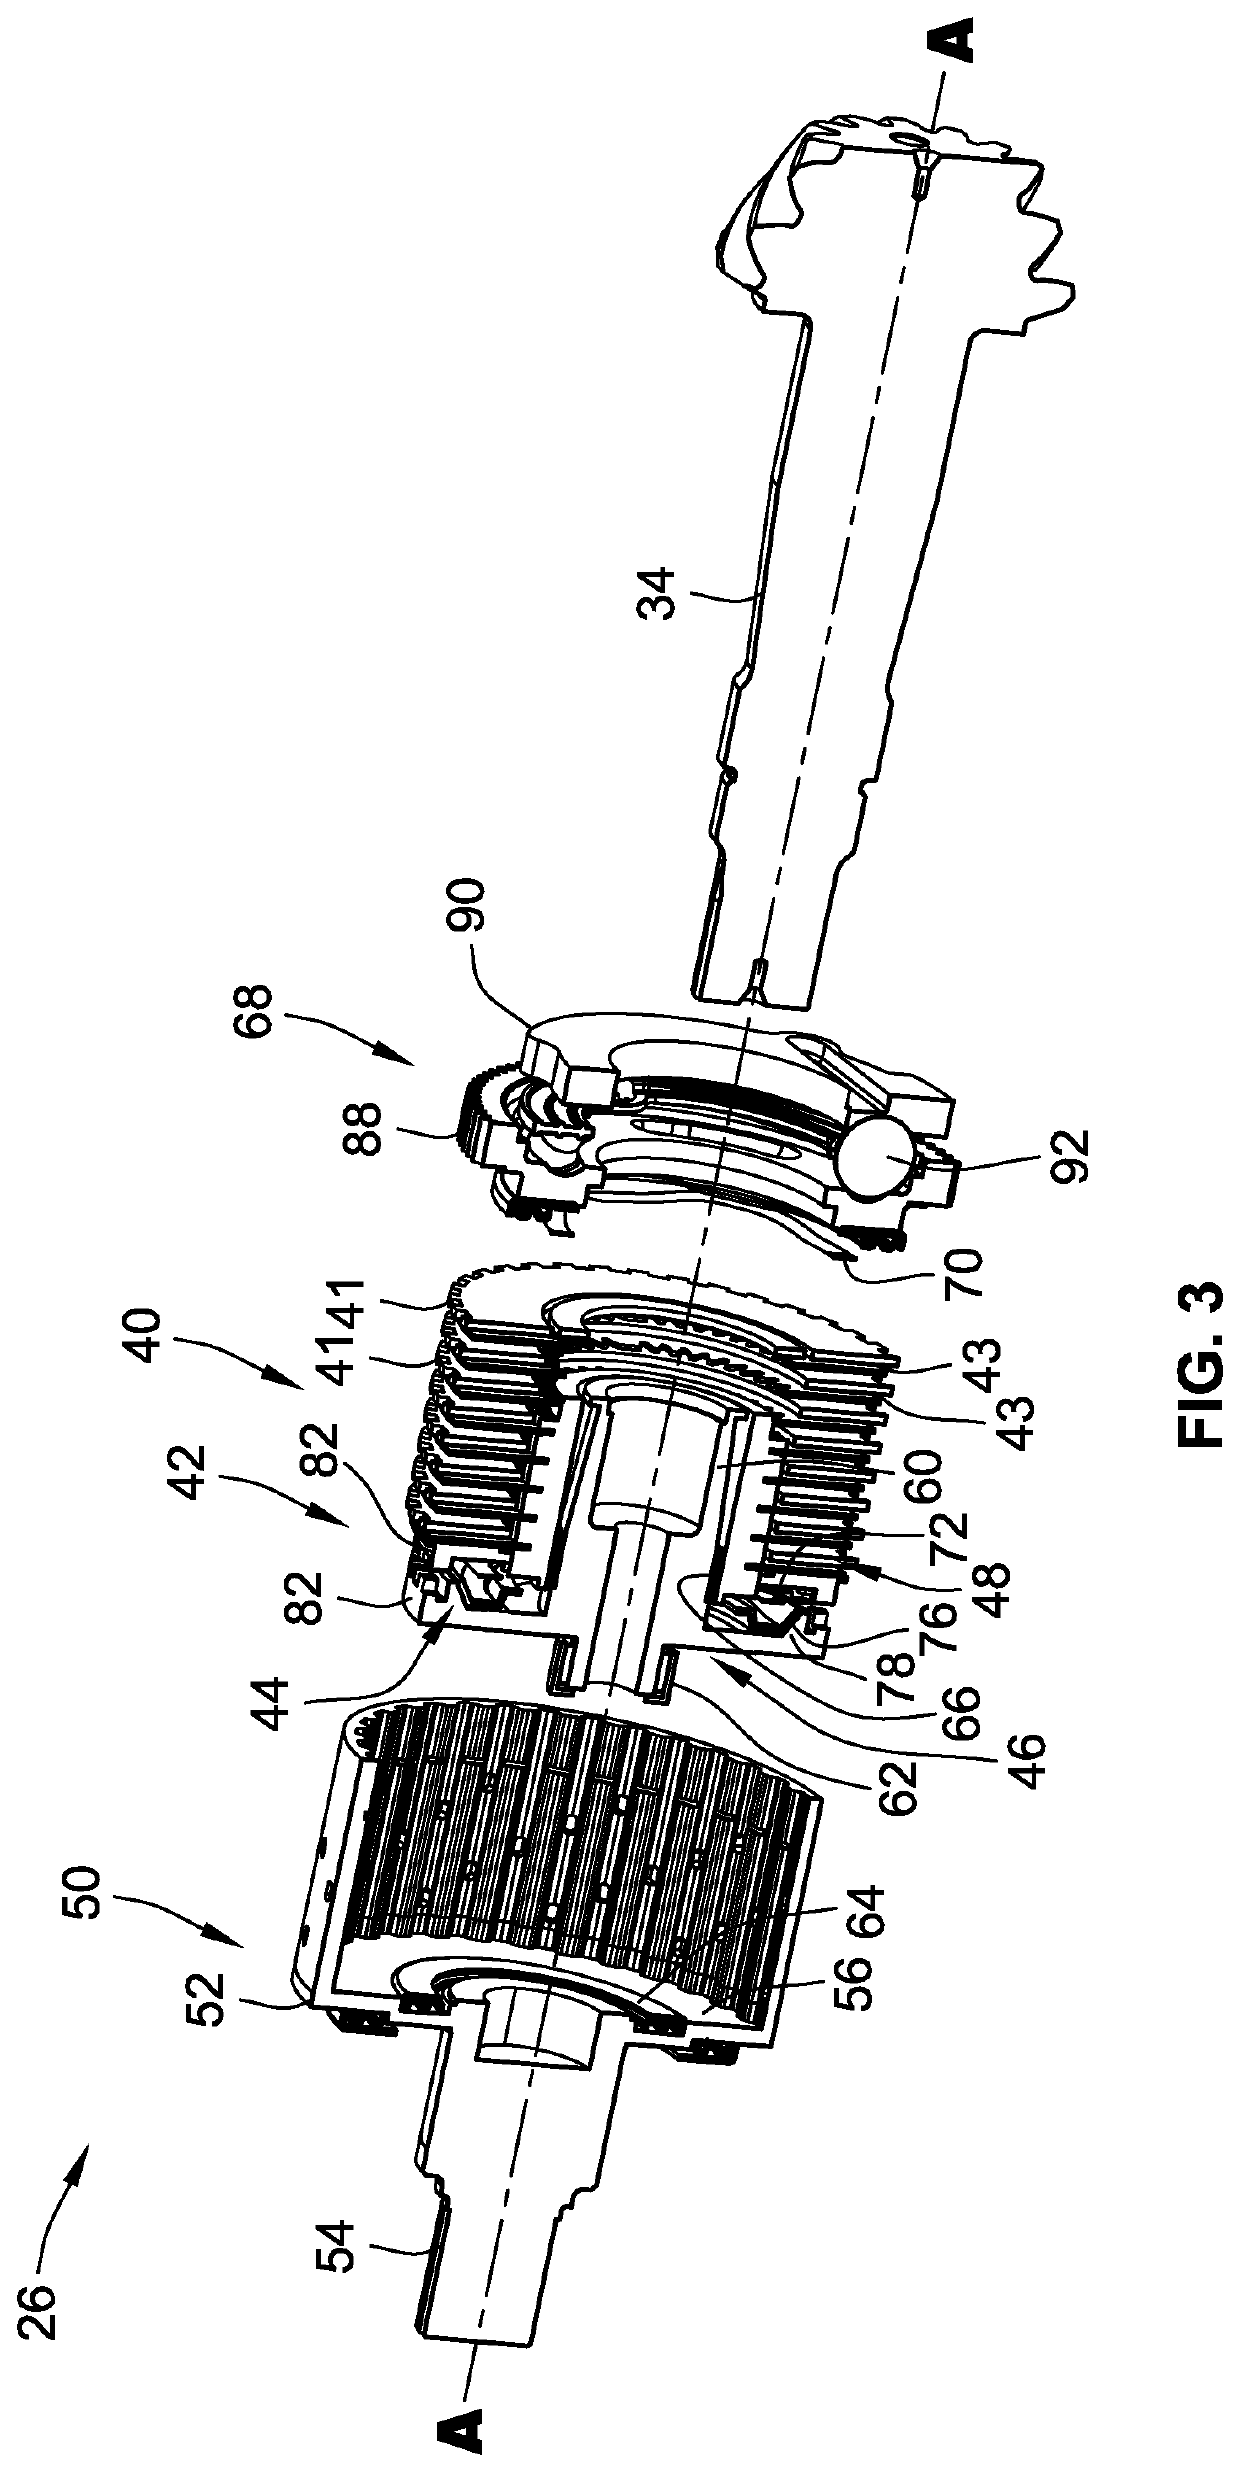 Friction clutch assemblies with low-drag disconnect clutch pack having cone clutch synchronizer